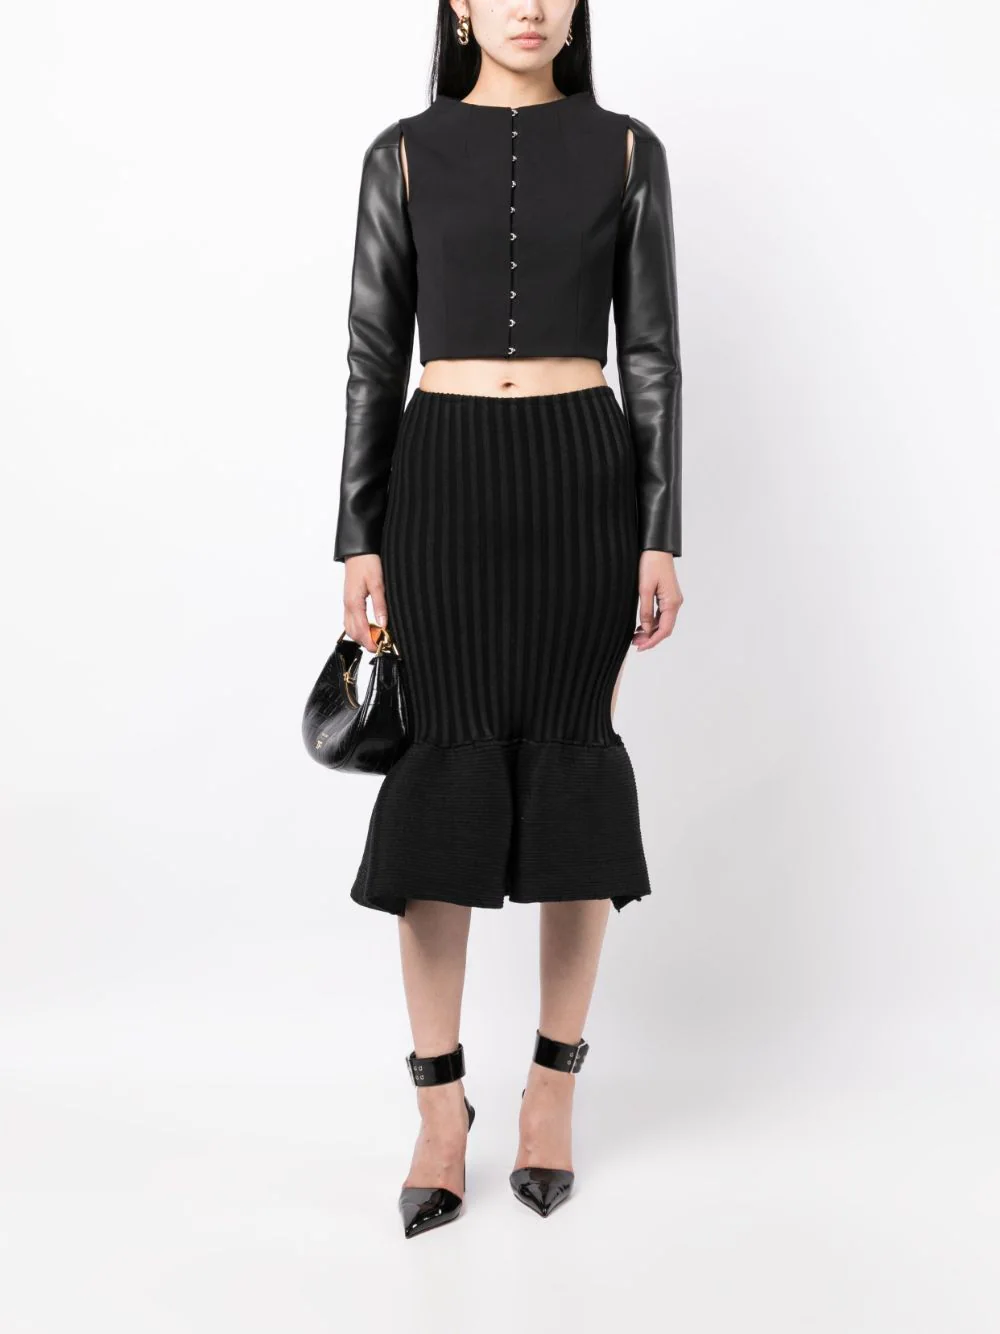 Del-Core-Tailored-Top-With-Leather-Sleeve-Black-2